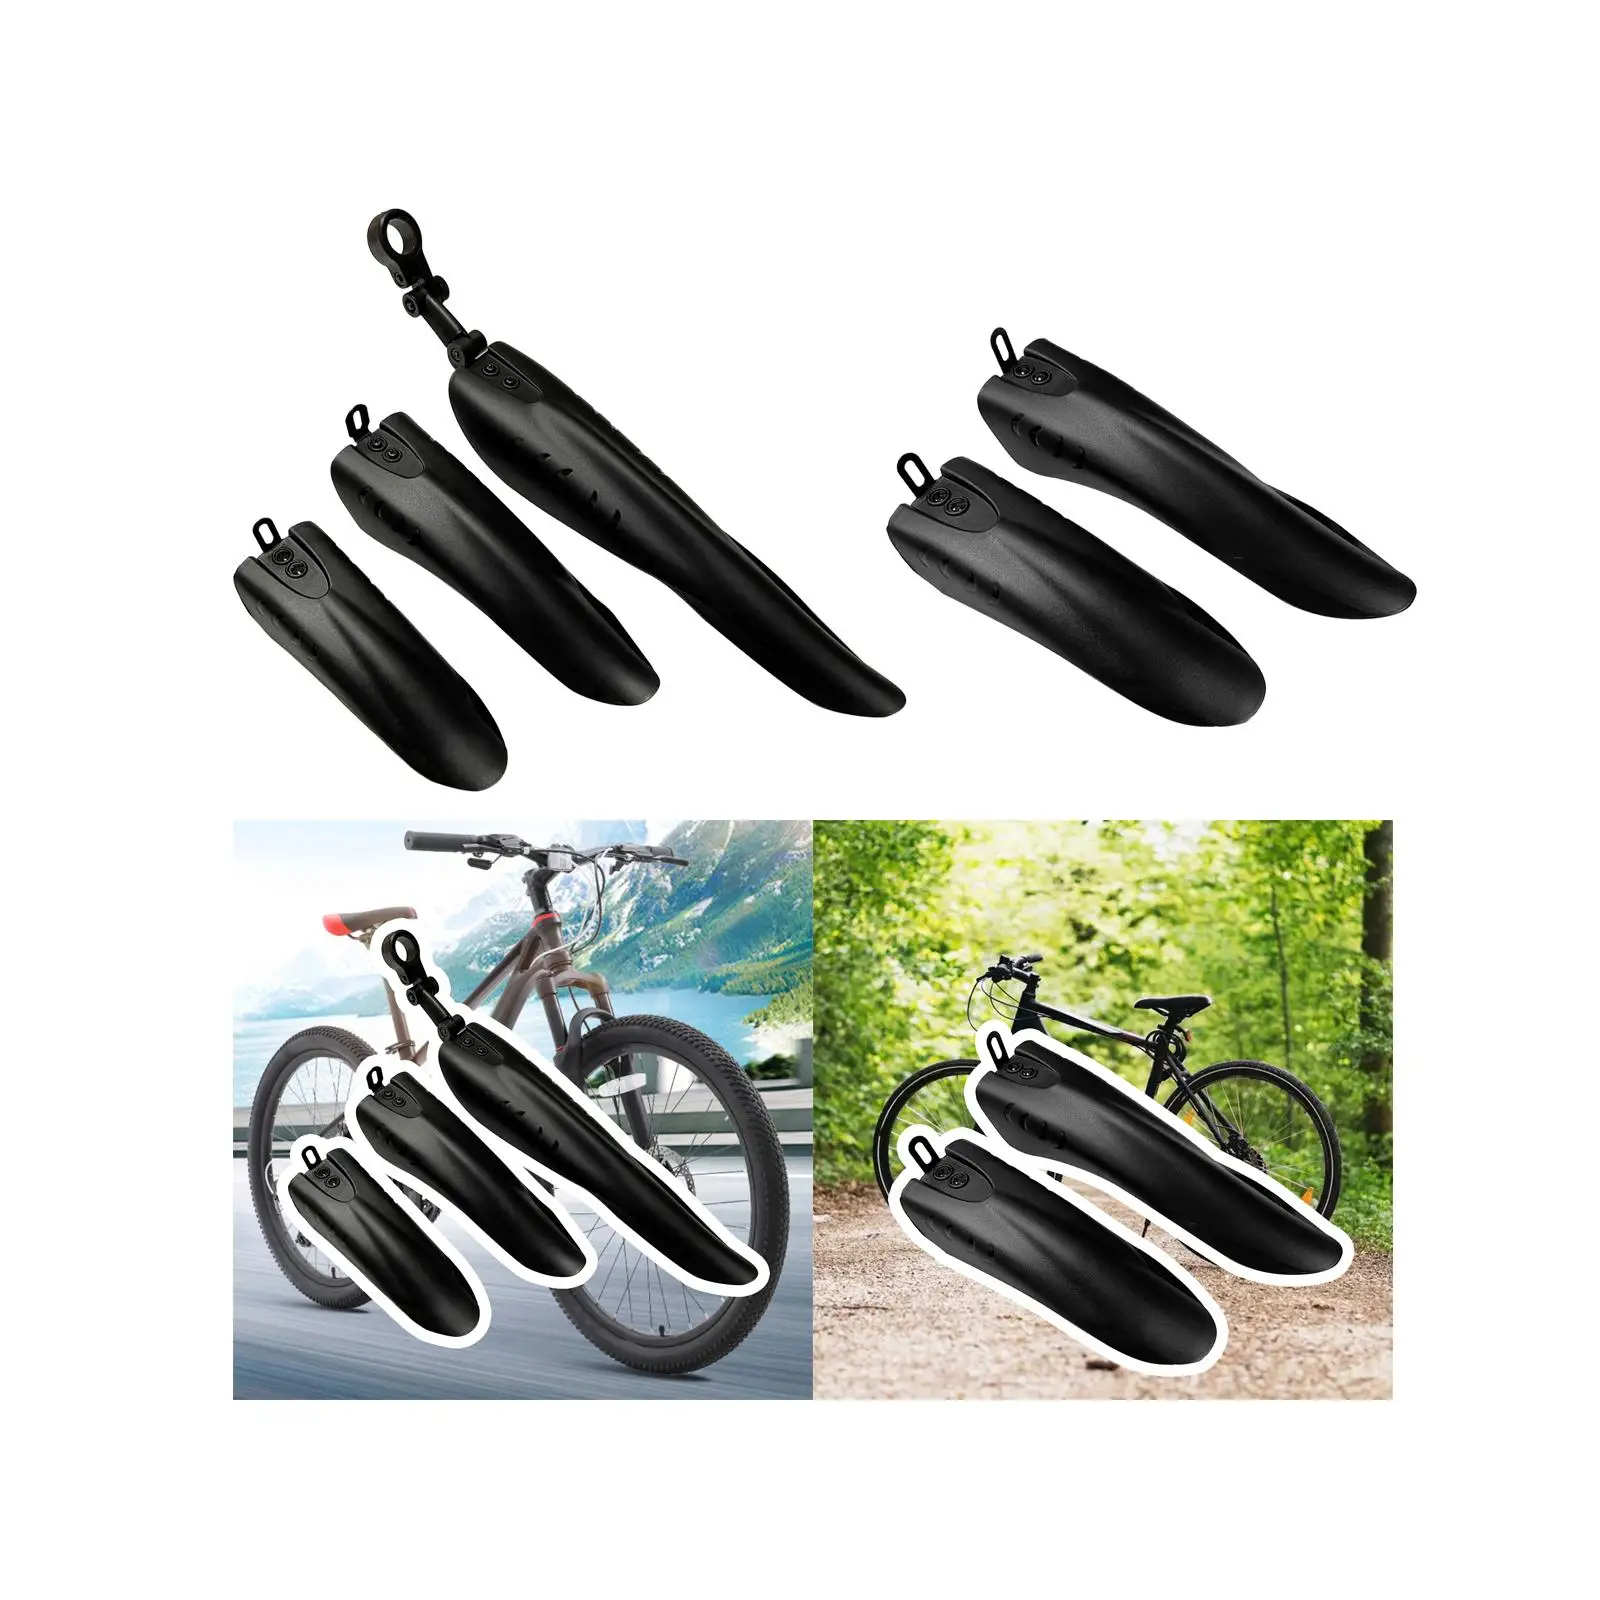 Bike Mudguard Front Rear Set Sturdy Supplies Replacement Accs Easy to Install Fenders for Outdoor Mountain Bike Sports